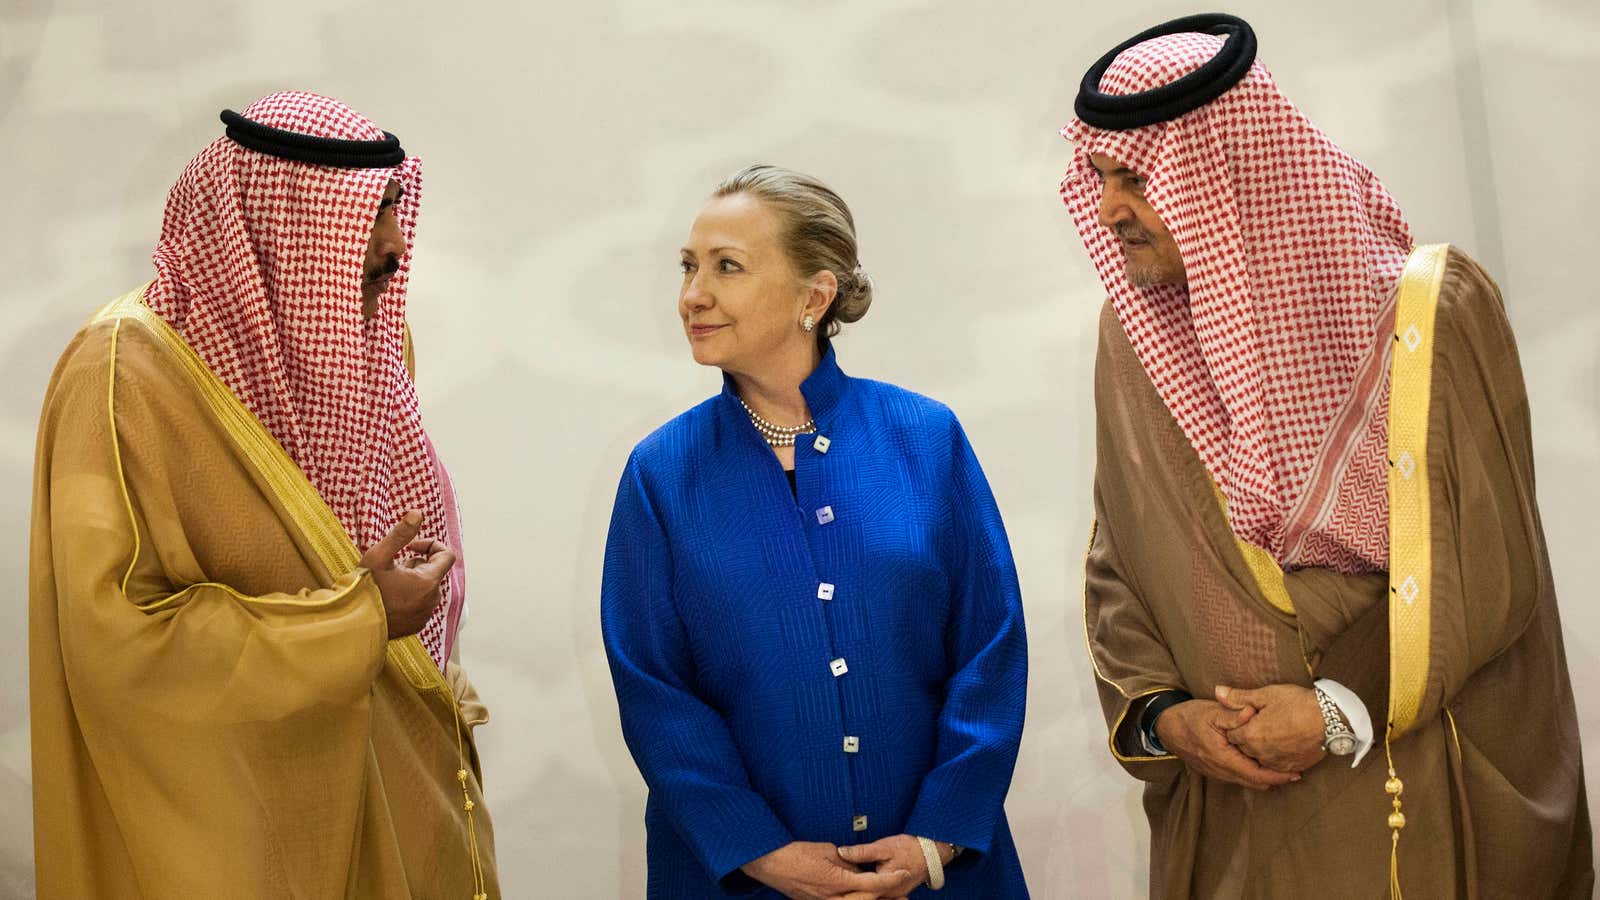 Saudi foreign minister Prince Saud al-Faisal, right, US secretary of state Hillary Clinton and Kuwaiti foreign minister Sheikh Sabah Khaled al-Hamad al-Sabah chat prior to a group photo before a US-Gulf Cooperation Council forum at the Gulf Cooperation Council Secretariat in Riyadh, Saudi Arabia, Mar. 2012.